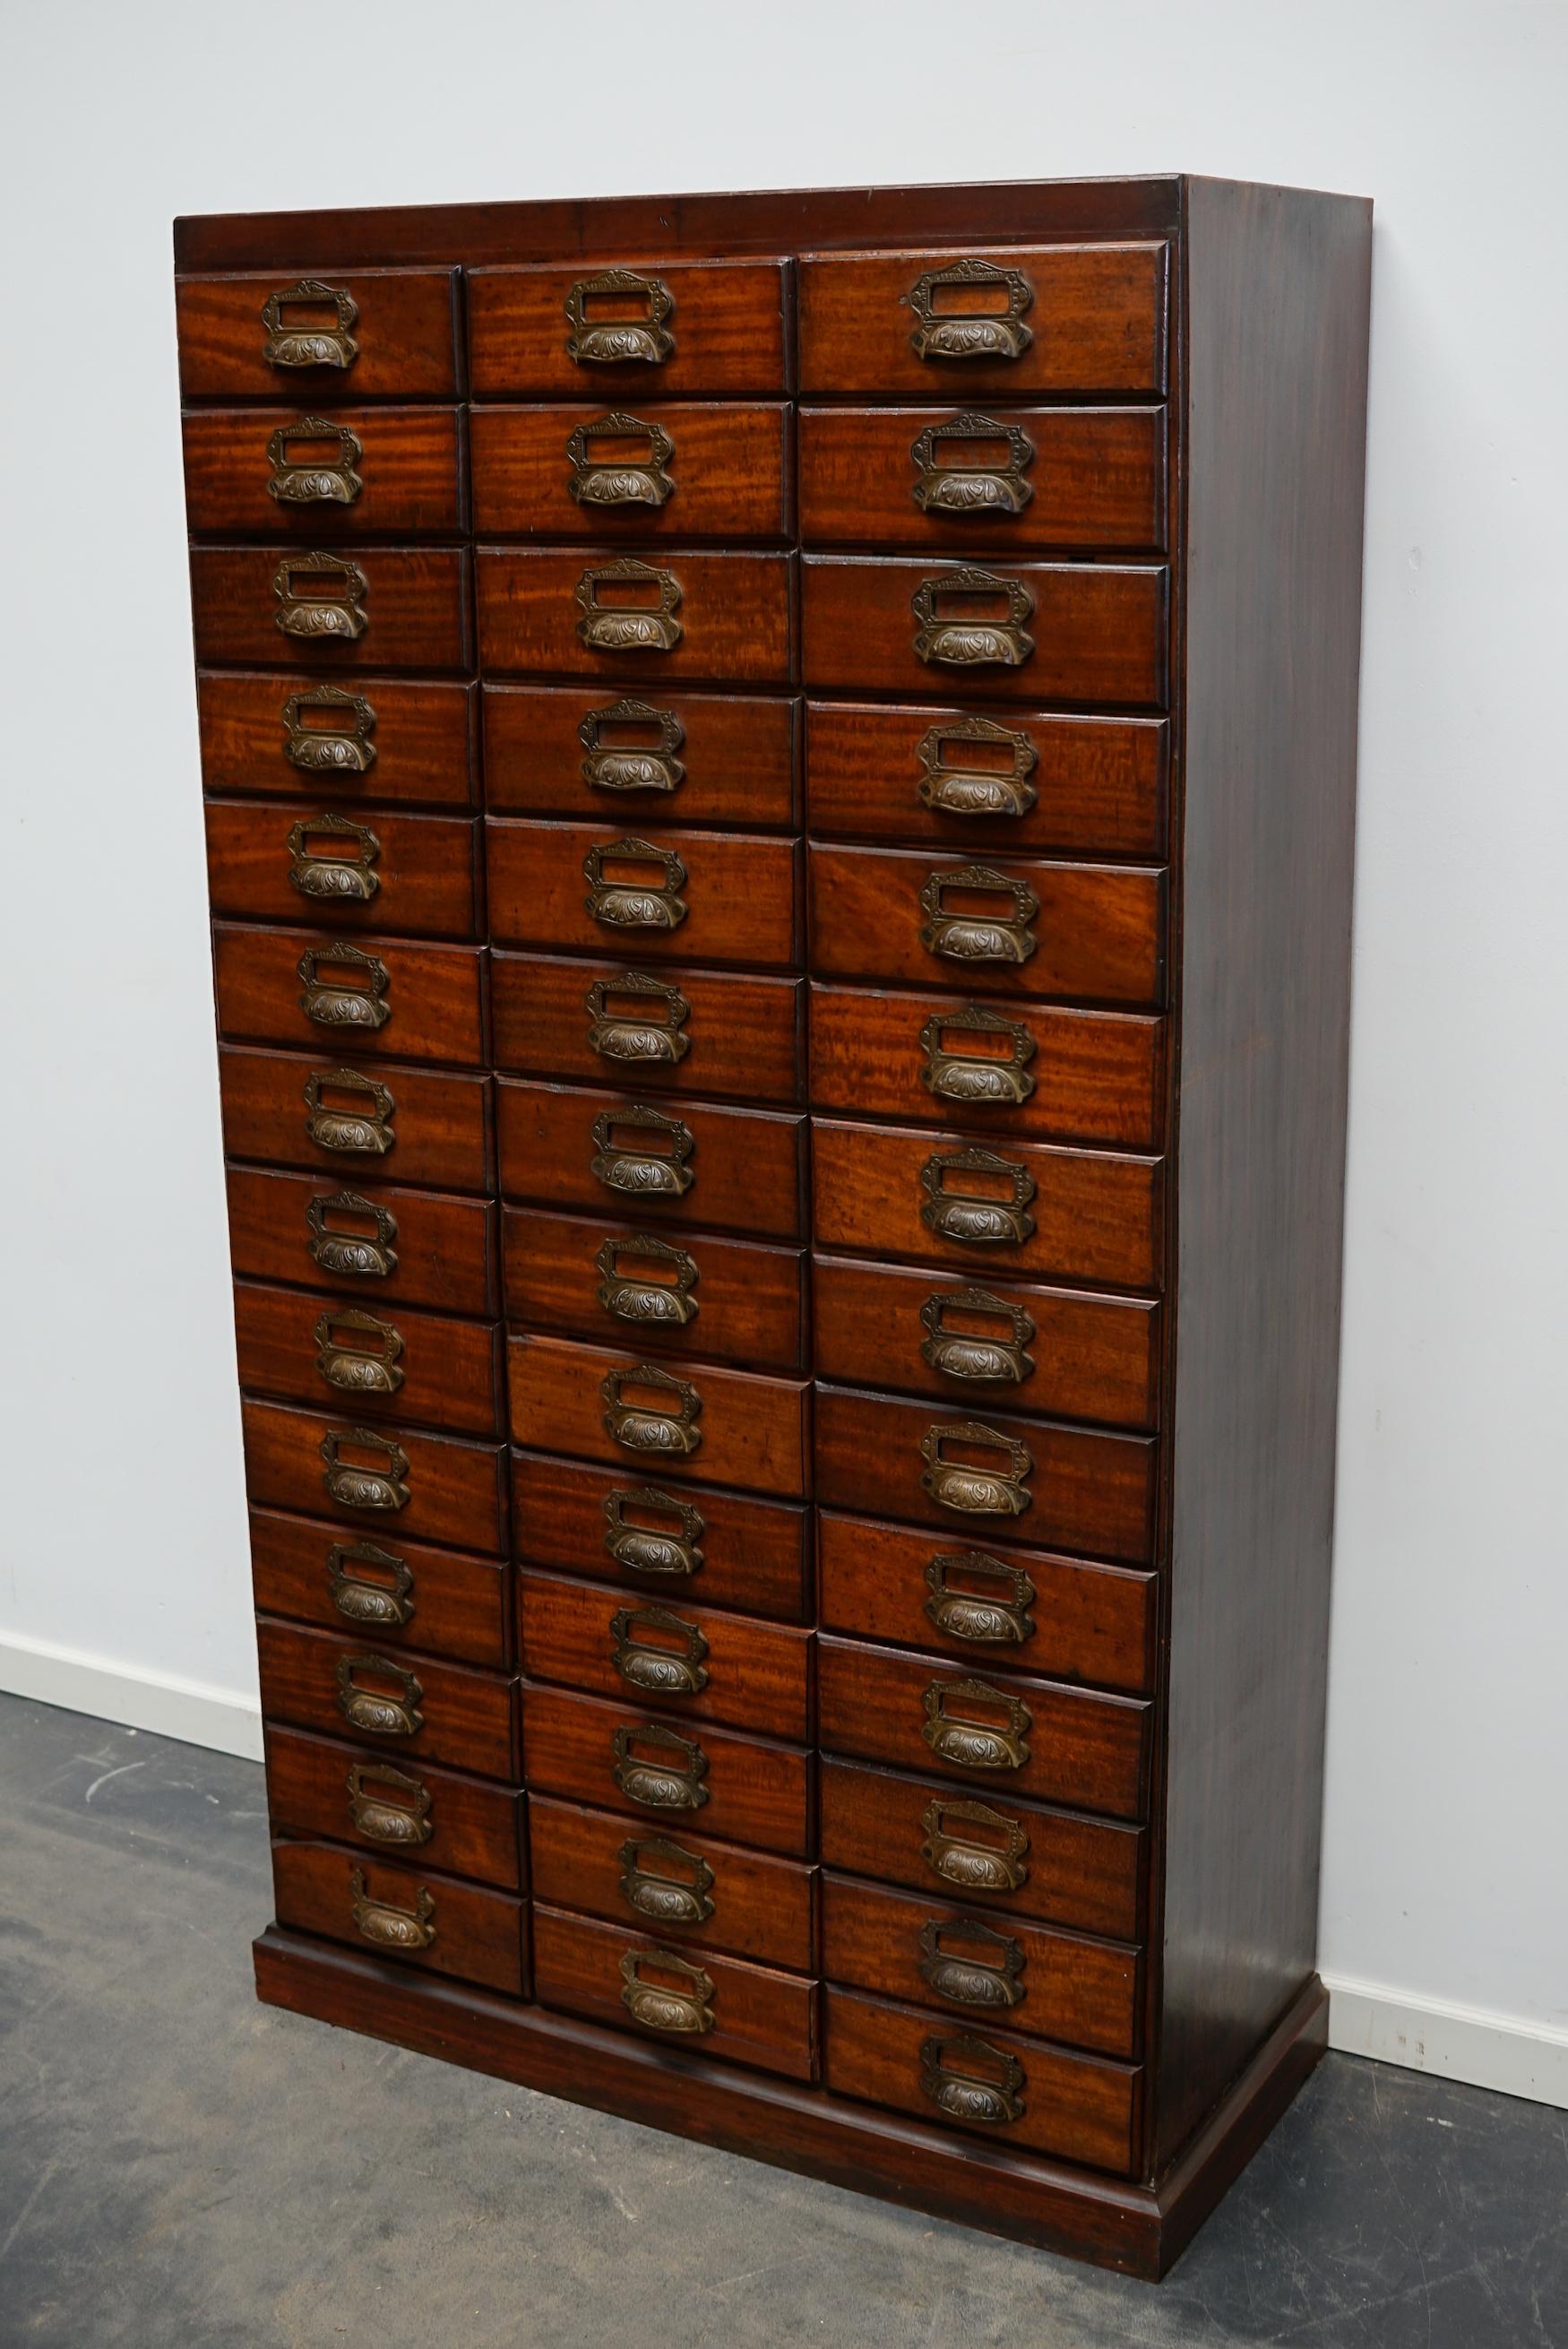 This unique filing cabinet / bank of drawers was designed and made around the turn of the century in France. The piece is made from mahogany with bronze hardware. The interior dimensions of the drawers are: D 30 x W 26 x H 7.5 cm.